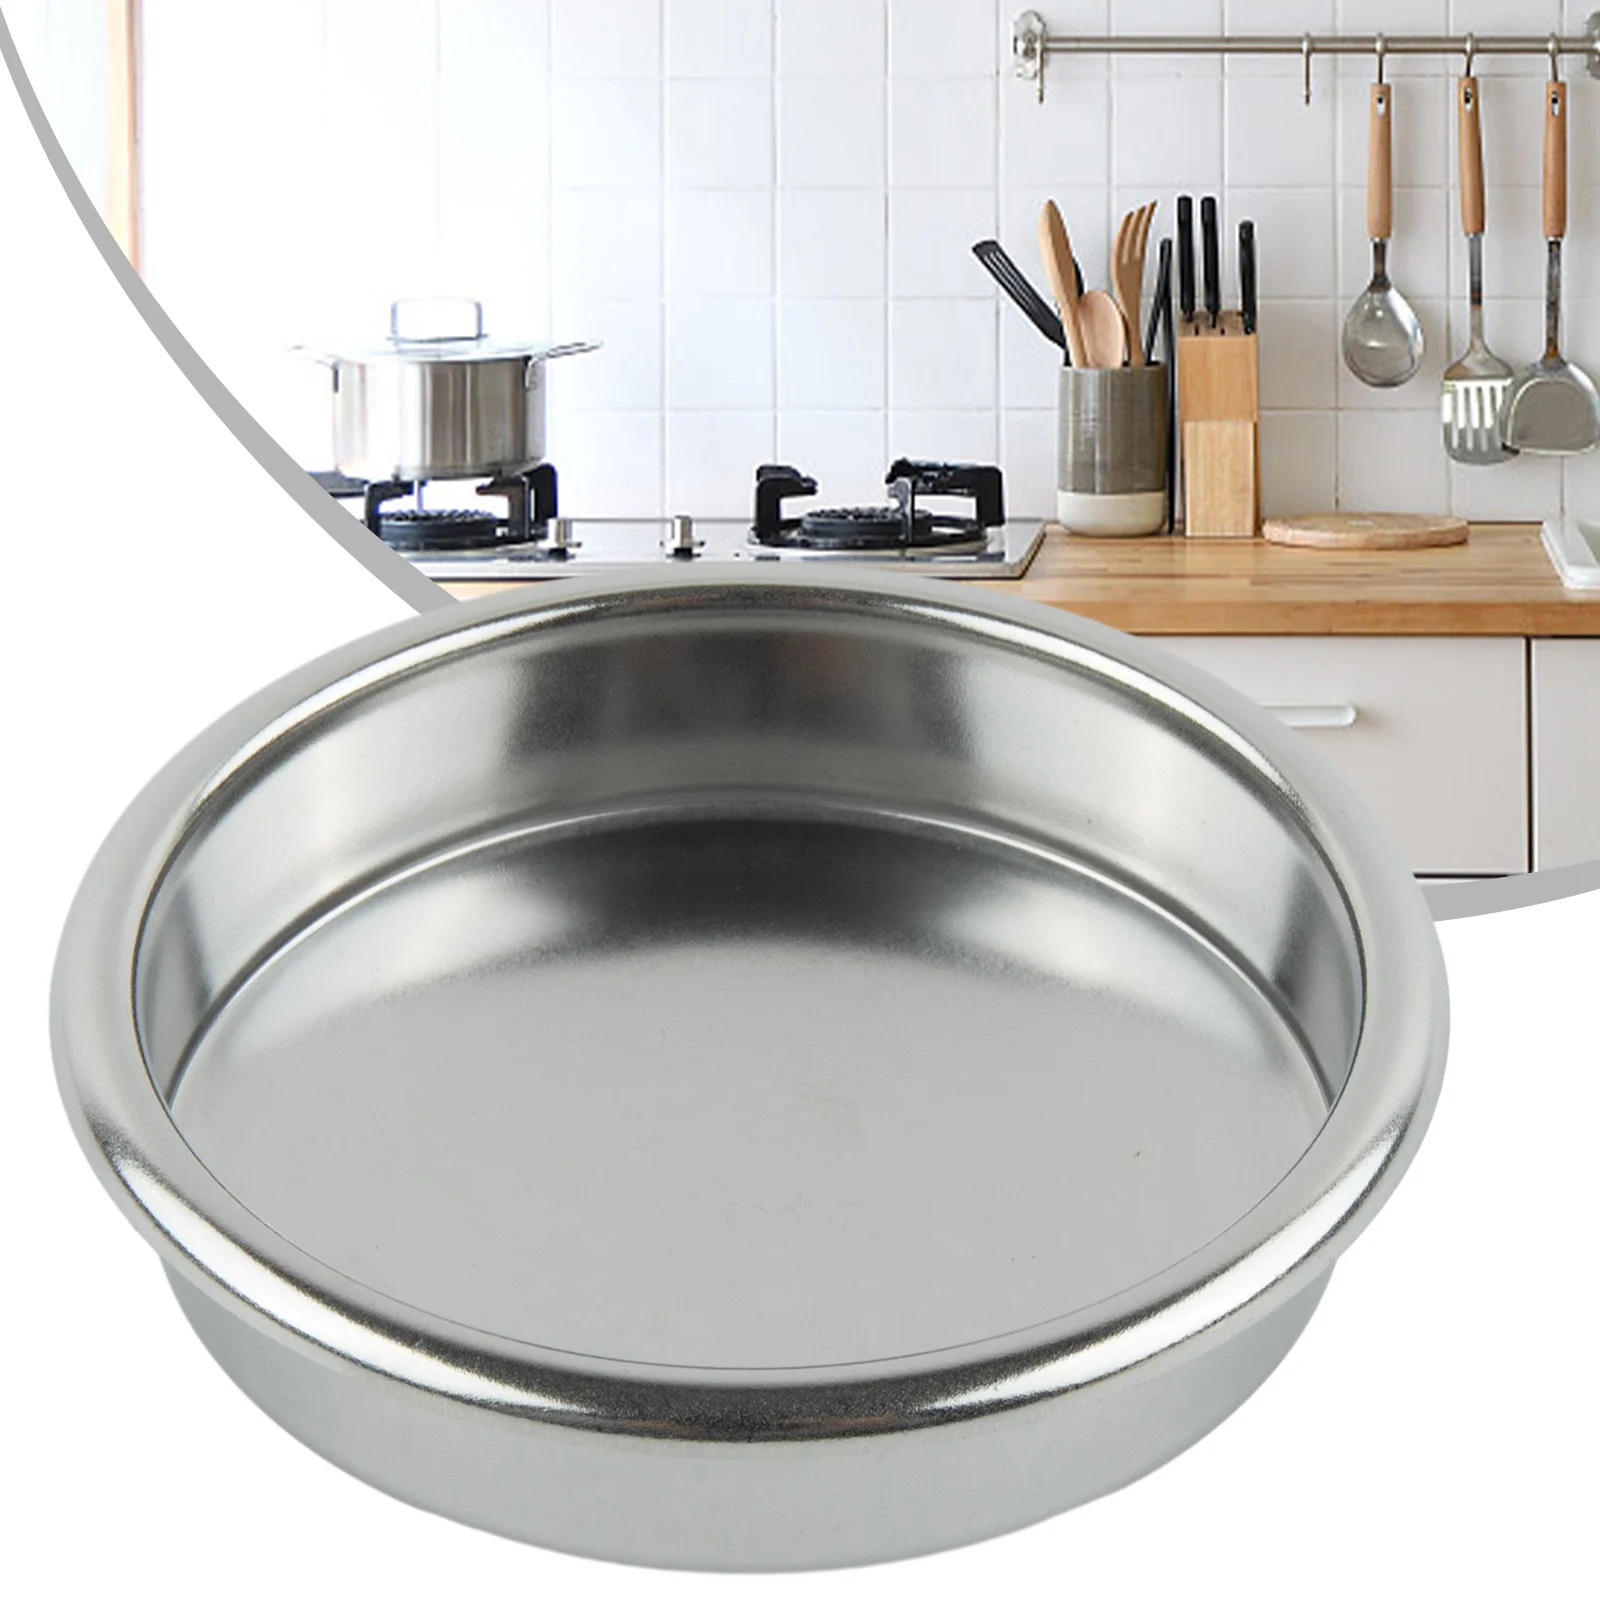 

Kitchen Tool Filter Bowl Accessories Gadgets Stainless Steel Dia 58mm Height 17mm Non-Porous High-Quality Materials